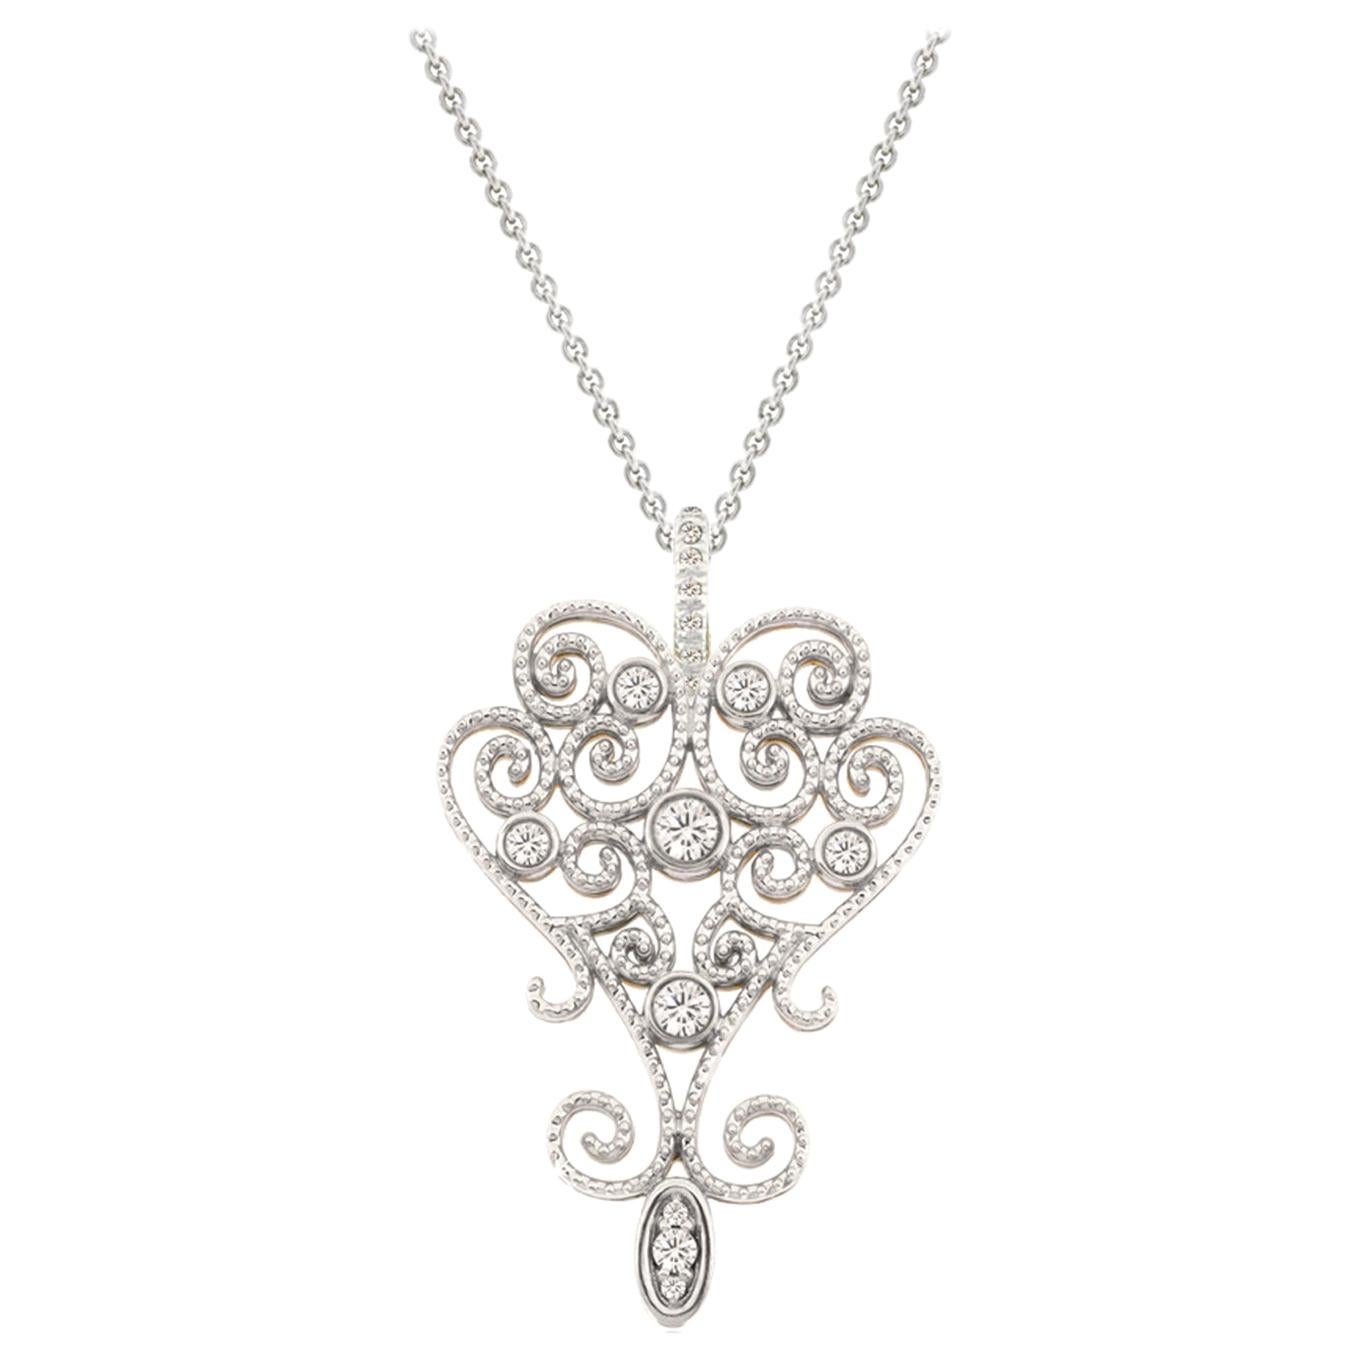 18Kt White and Rose Gold "Victorian Style" Diamond Pendant with 18Kt Gold Chain For Sale